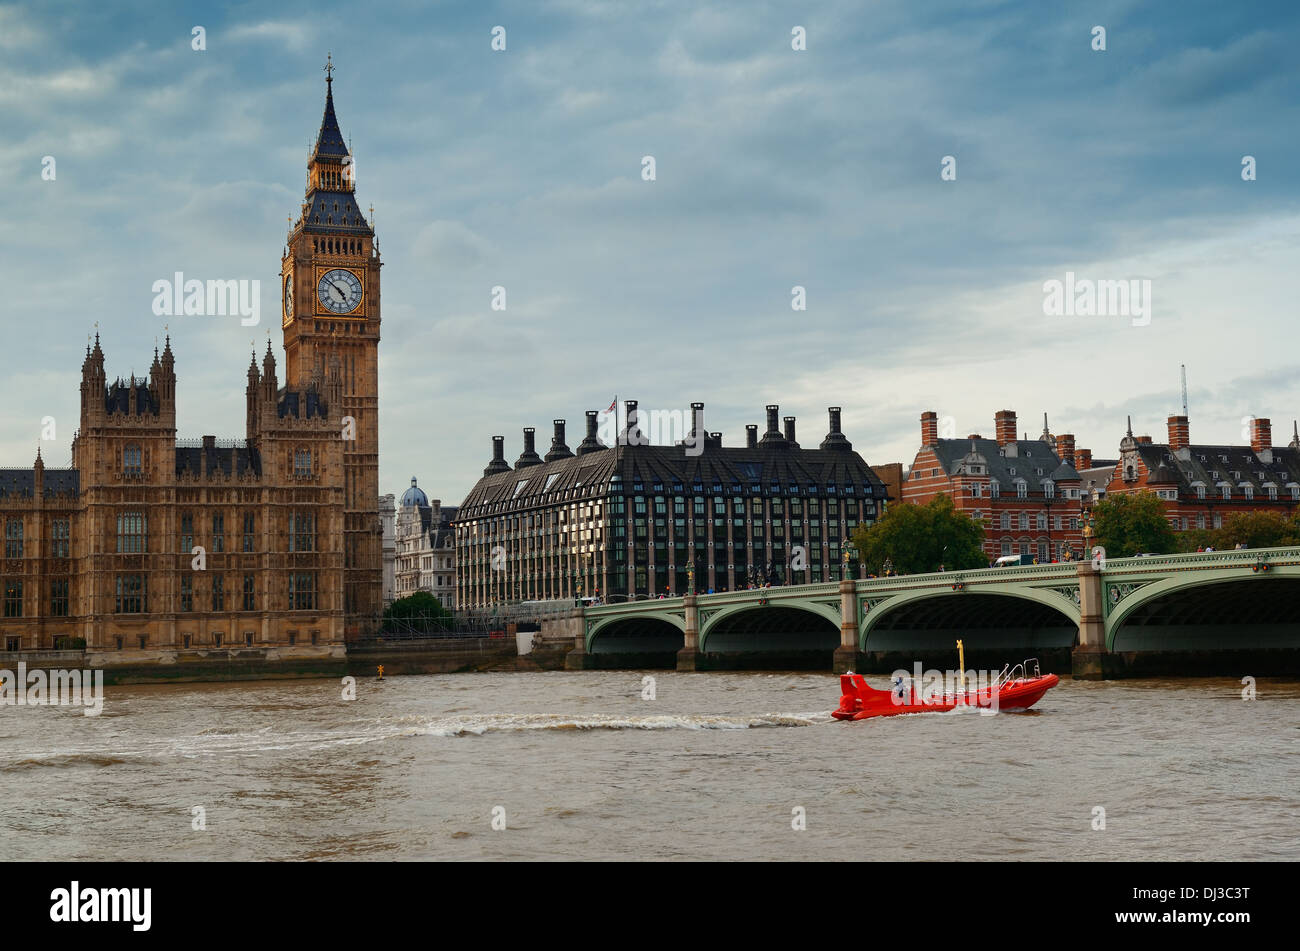 Big Ben and House of Parliament in London. Stock Photo